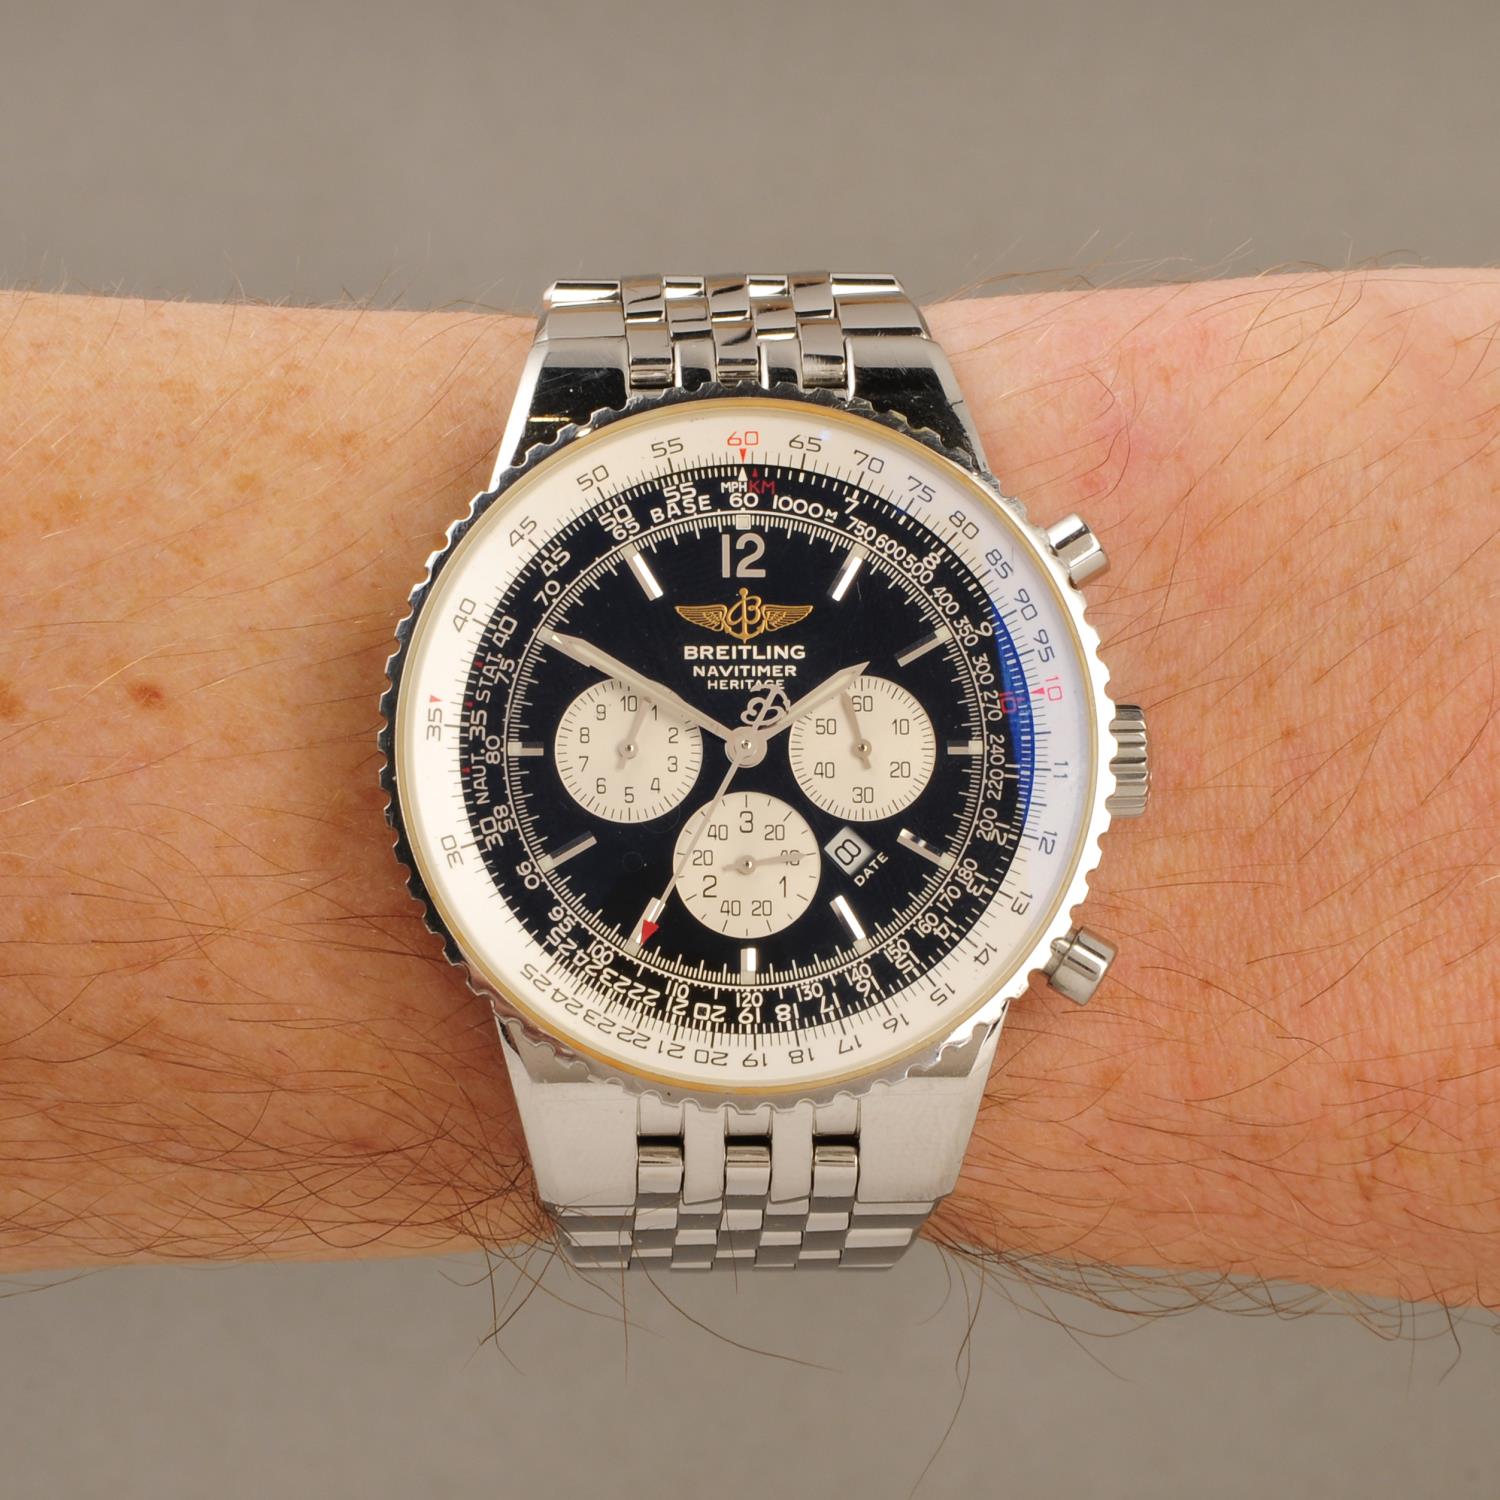 BREITLING - a gentleman's Navitimer Heritage chronograph bracelet watch. Stainless steel case with - Image 3 of 7